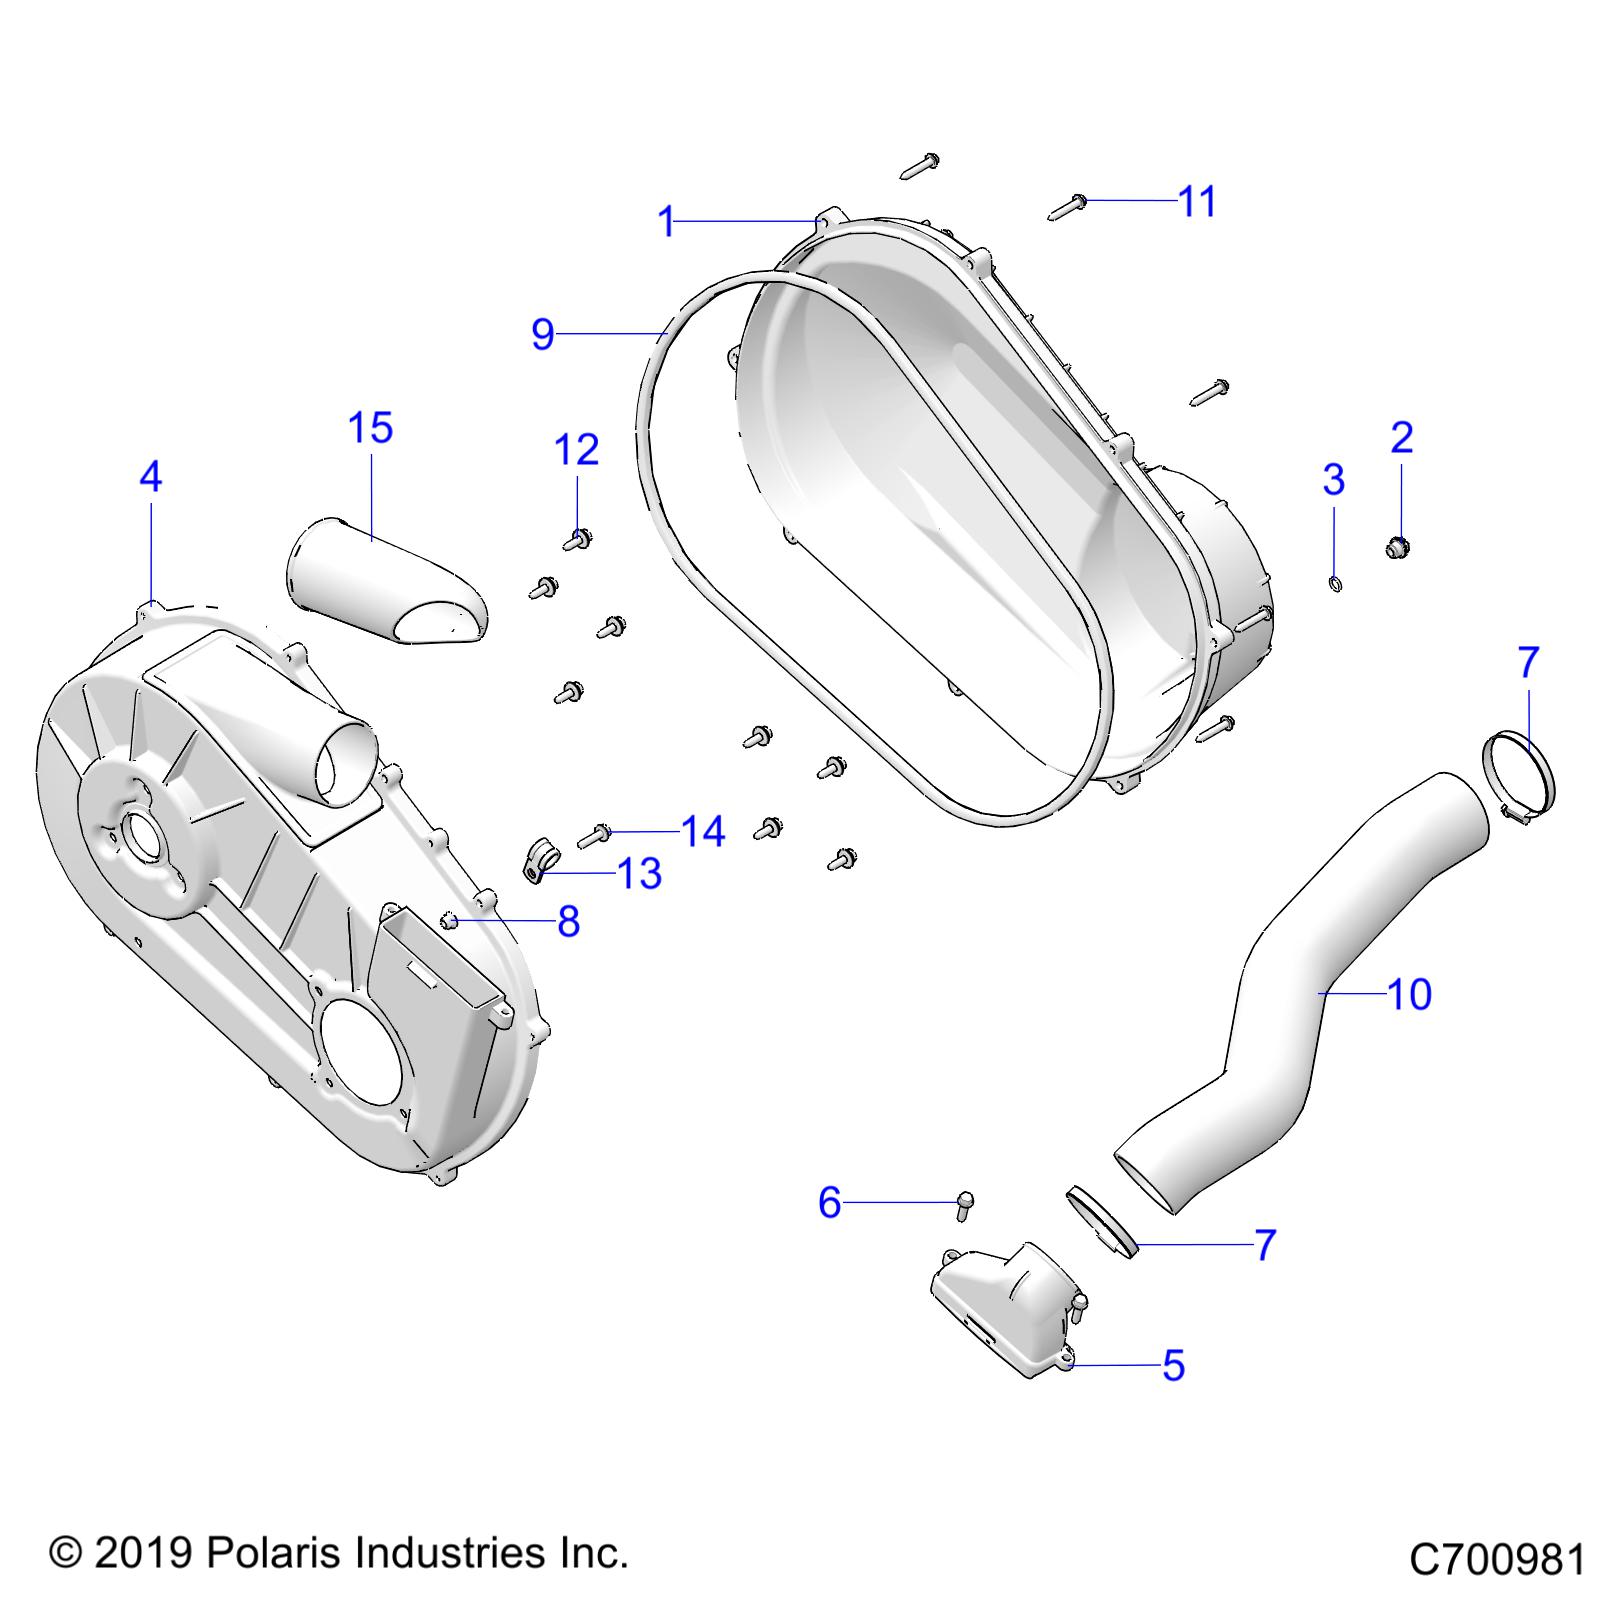 Part Number : 5454520 CLUTCH COVER  INNER